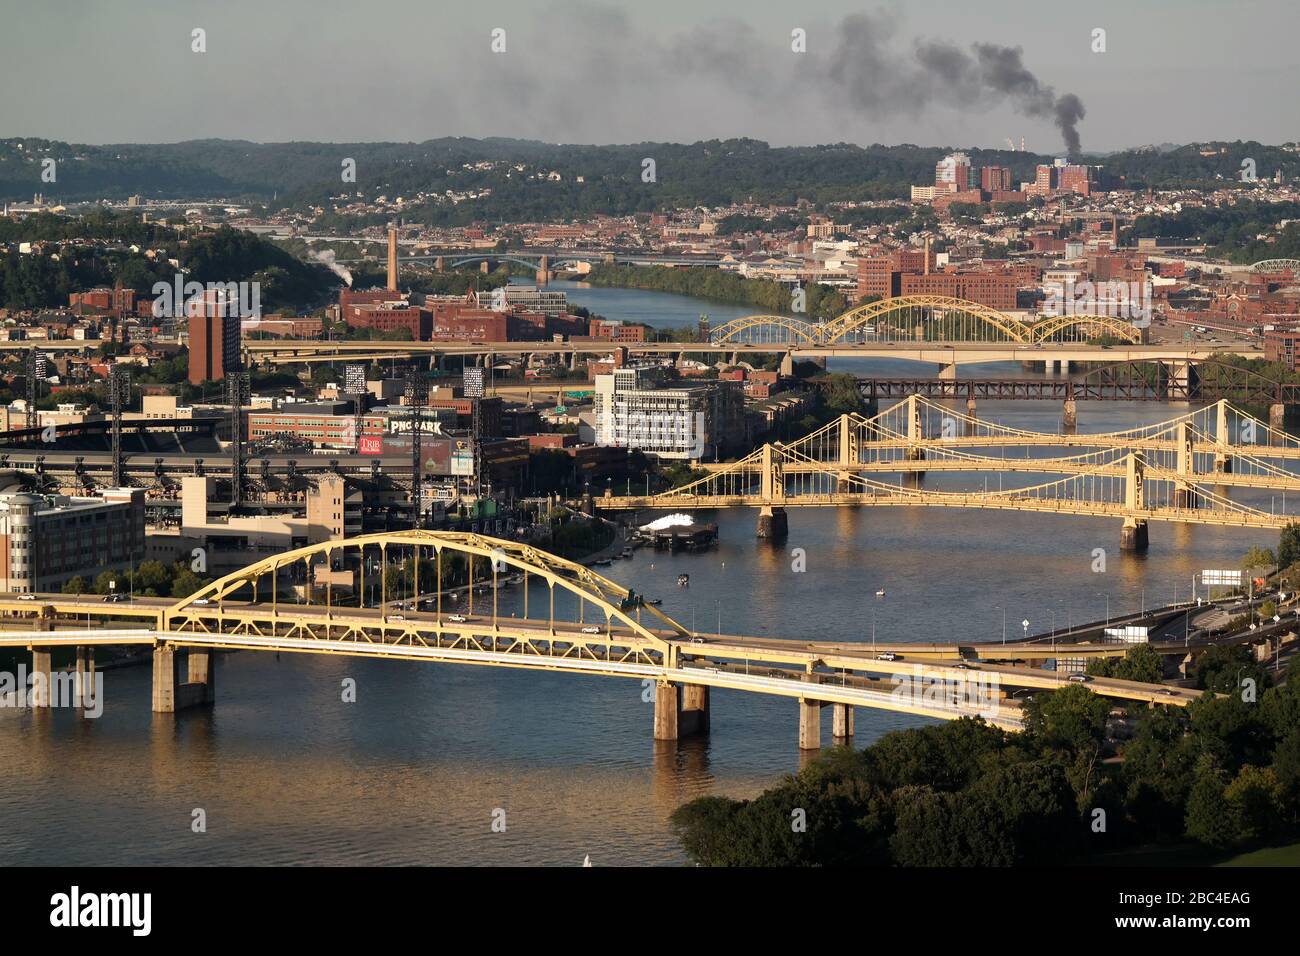 Bridges cross over the Allegheny River in the center of Pittsburgh, Pennsylvania, USA. The Fort Duquesne Bridge is in the foreground. Stock Photo